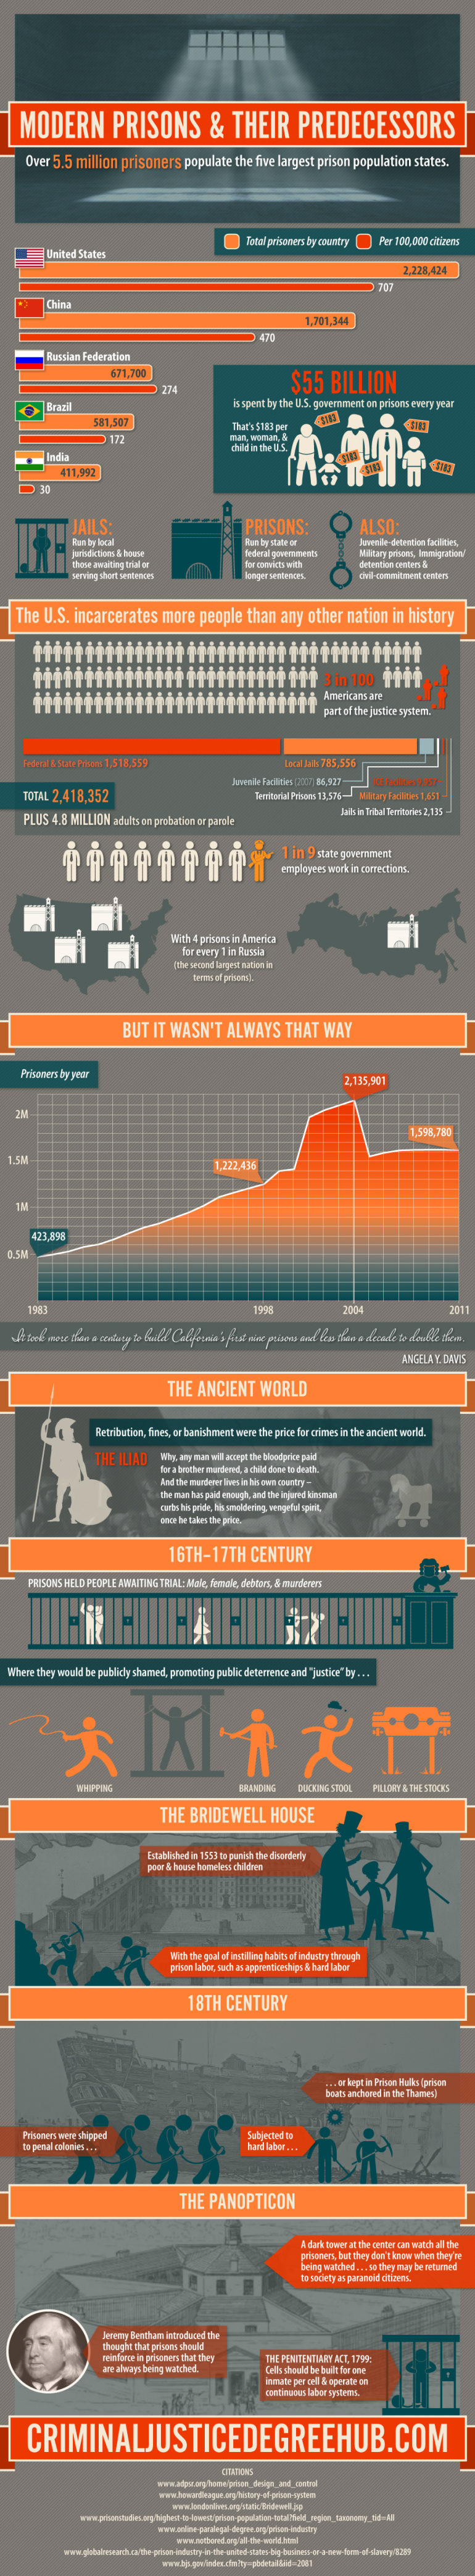 Infographic: Modern Prisons And Their Predecessors